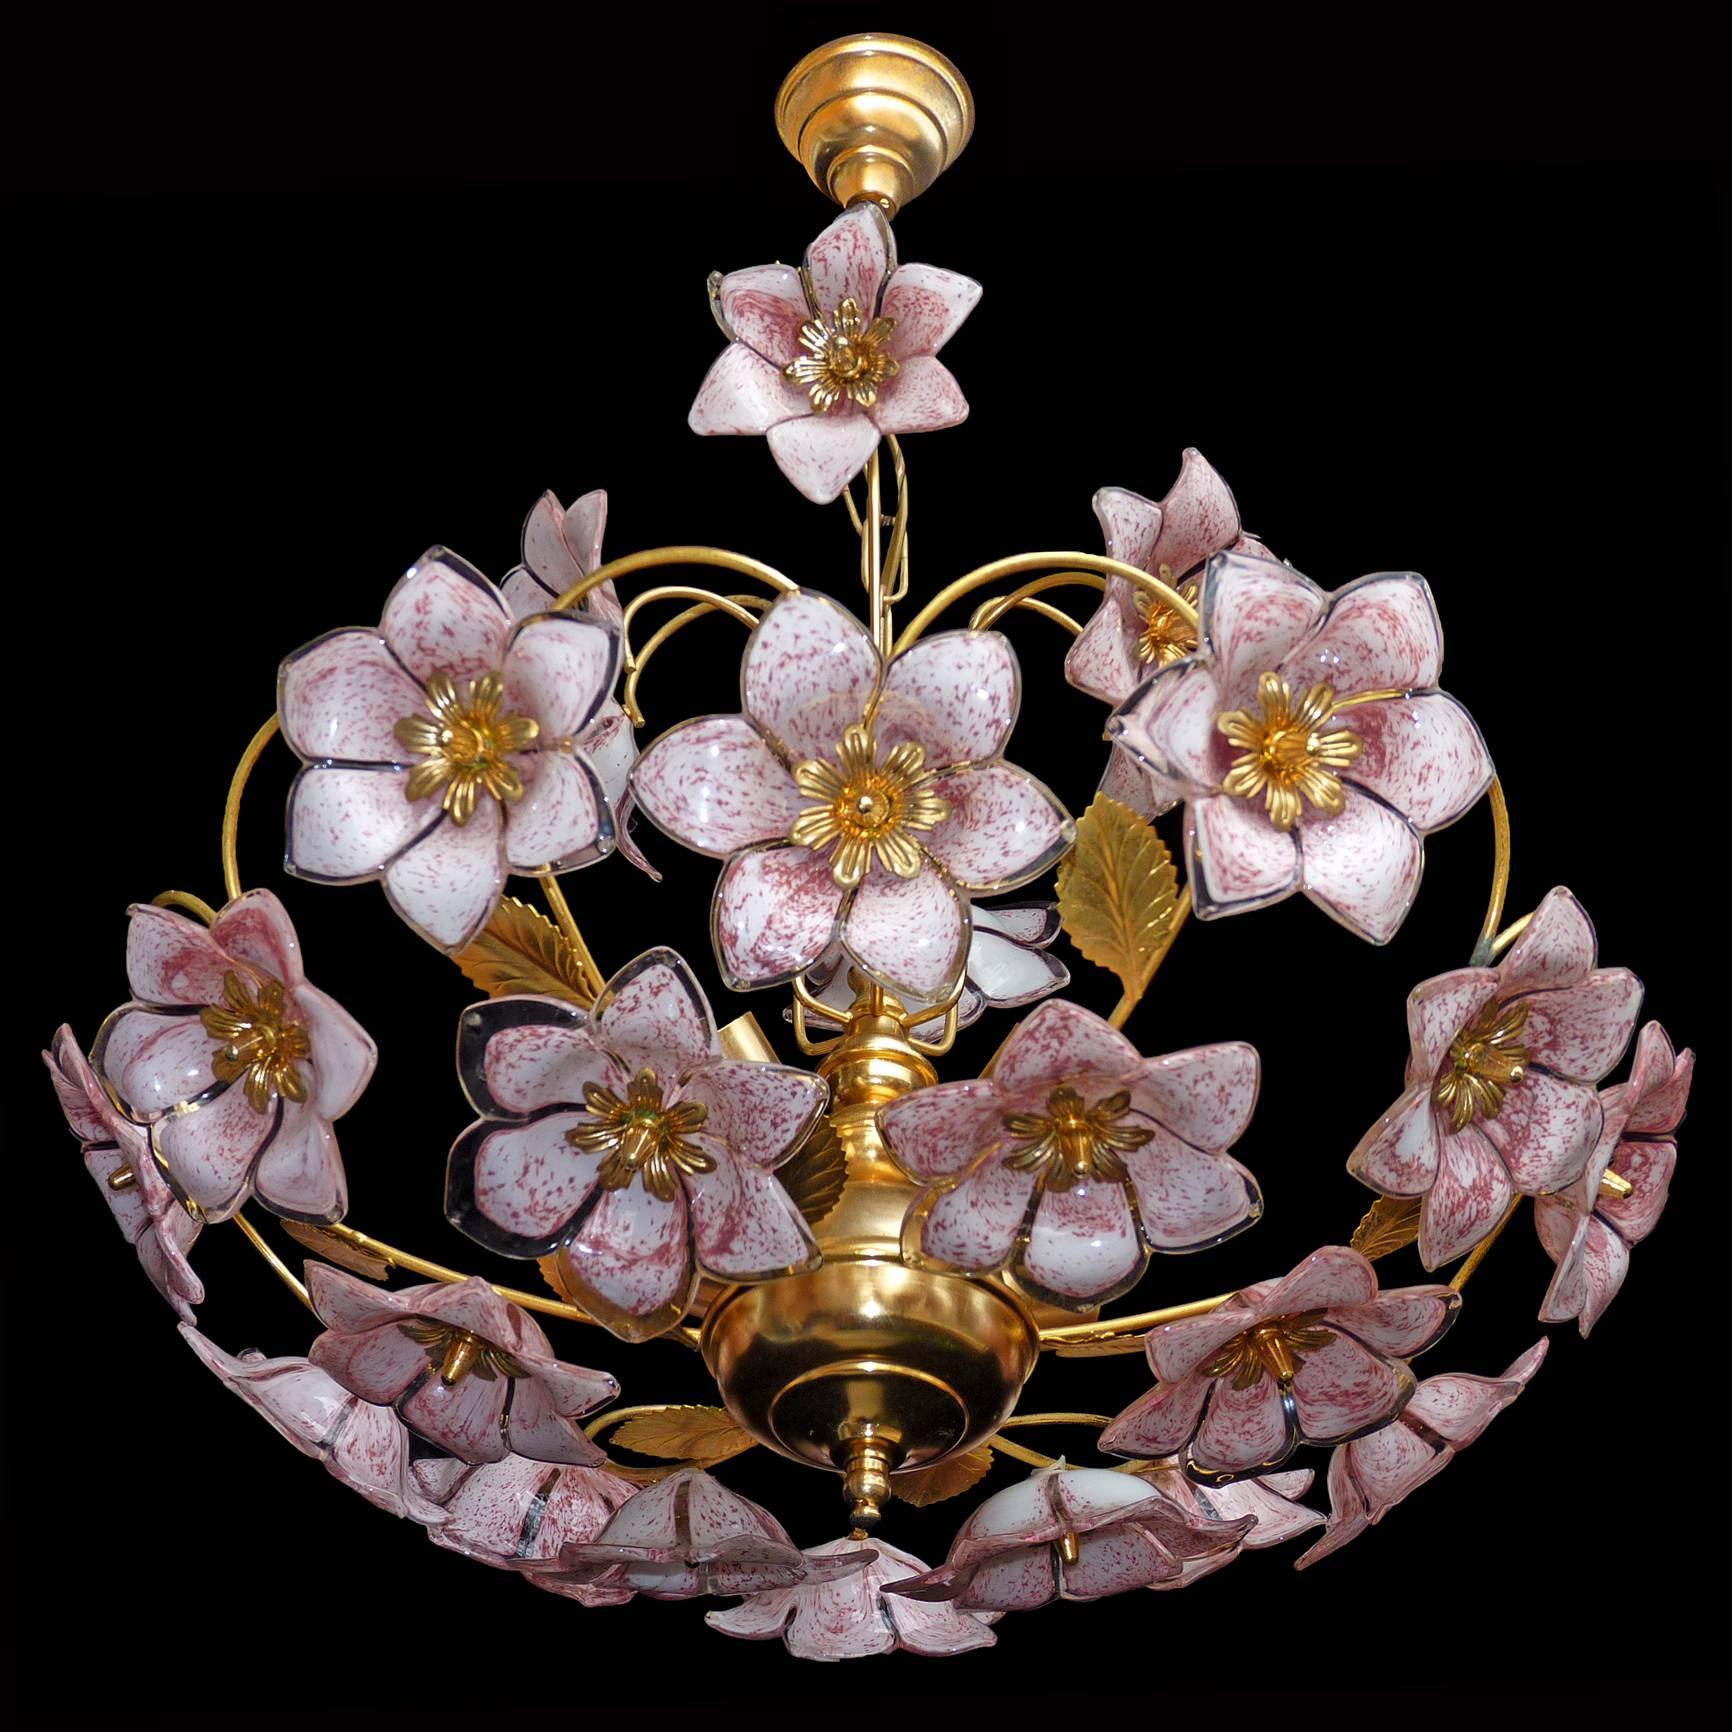 1960s vintage Italian Murano flower bouquet after Venini art-glass/ 24 hand-blow white and clear glass flowers and gold-plated brass.
Measures: 
Diameter 22 in/ 55 cm
Height 30 in/ 75 cm
Weight: 11 lb/5 Kg
Four light bulbs E14/ 60 W, good